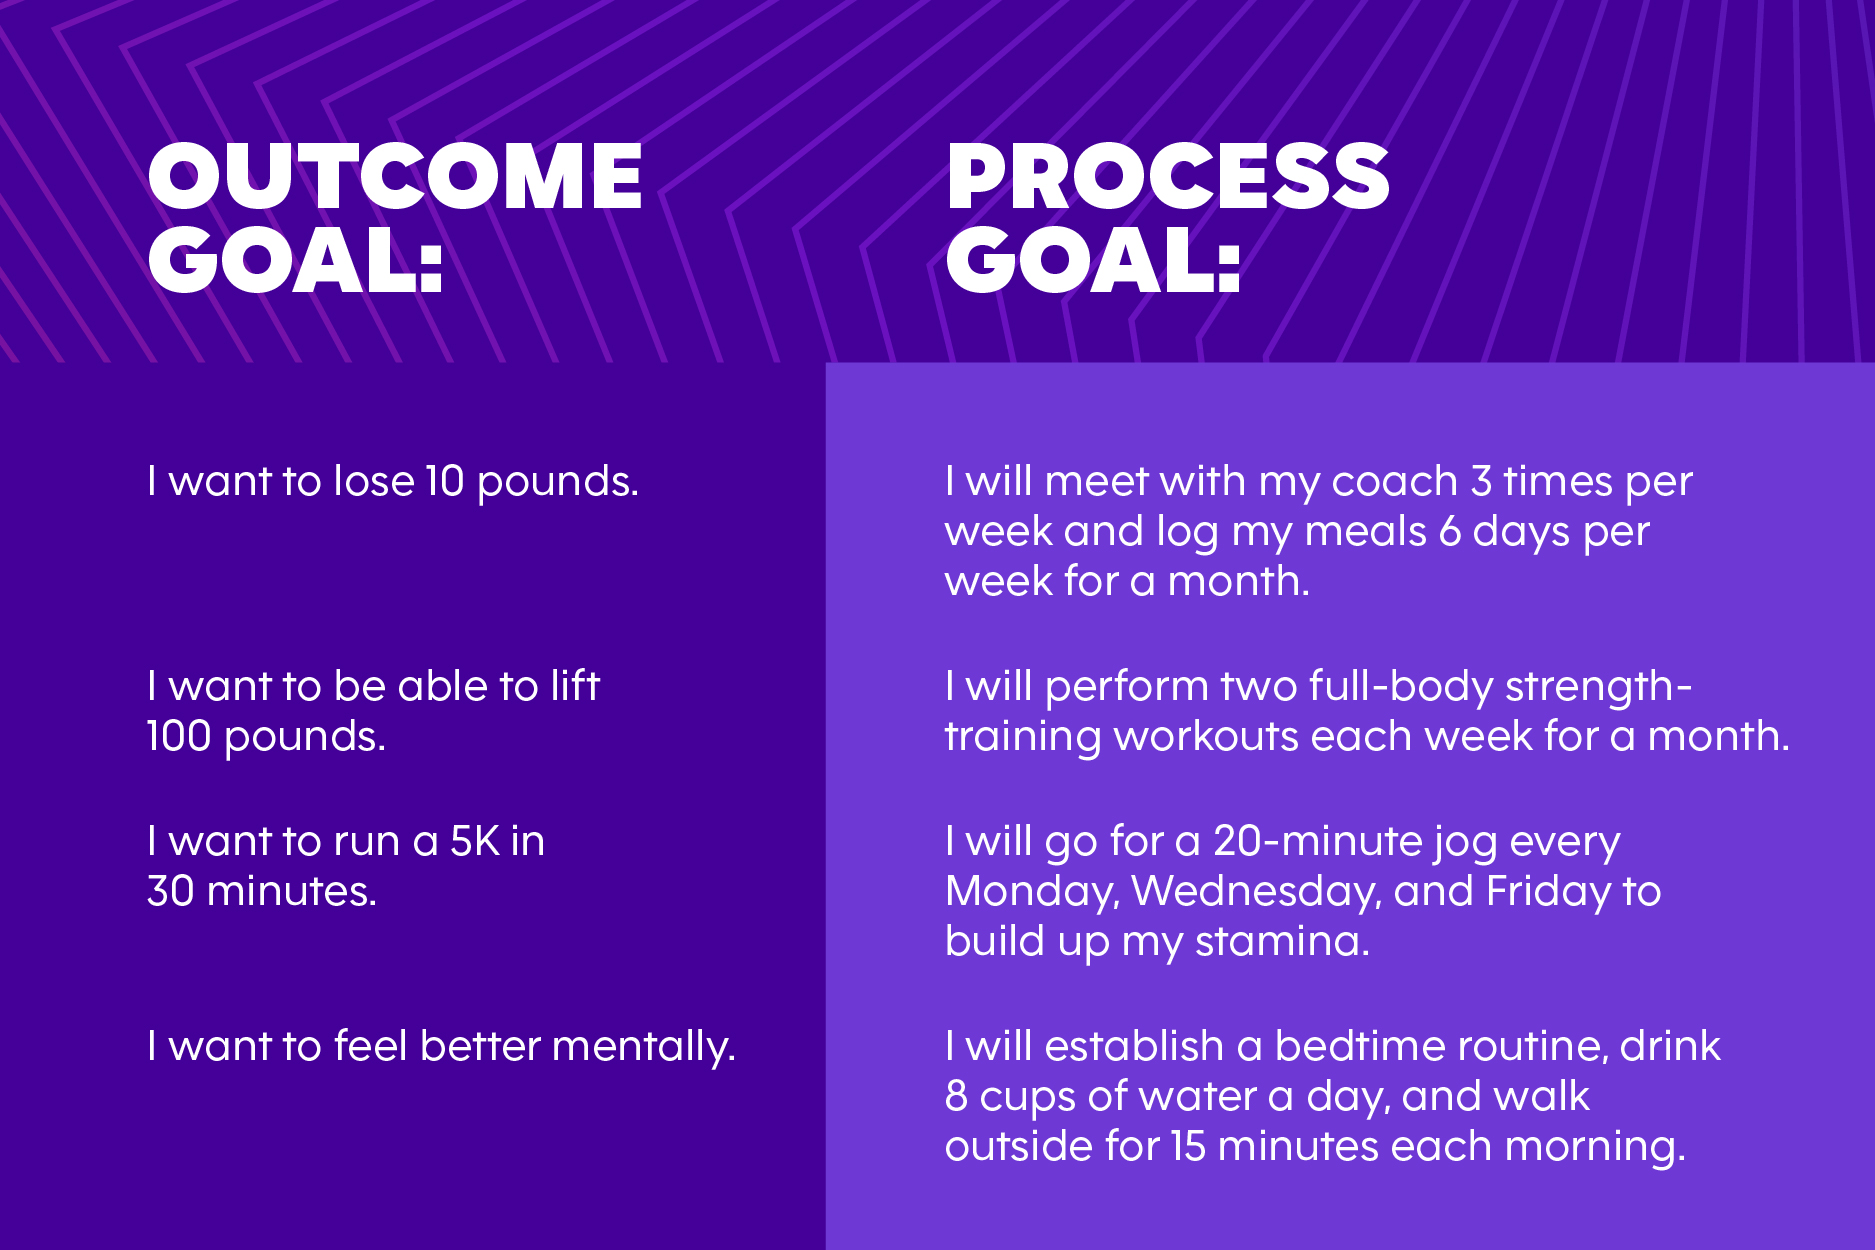 Chart showing examples of outcome goals and process goals.